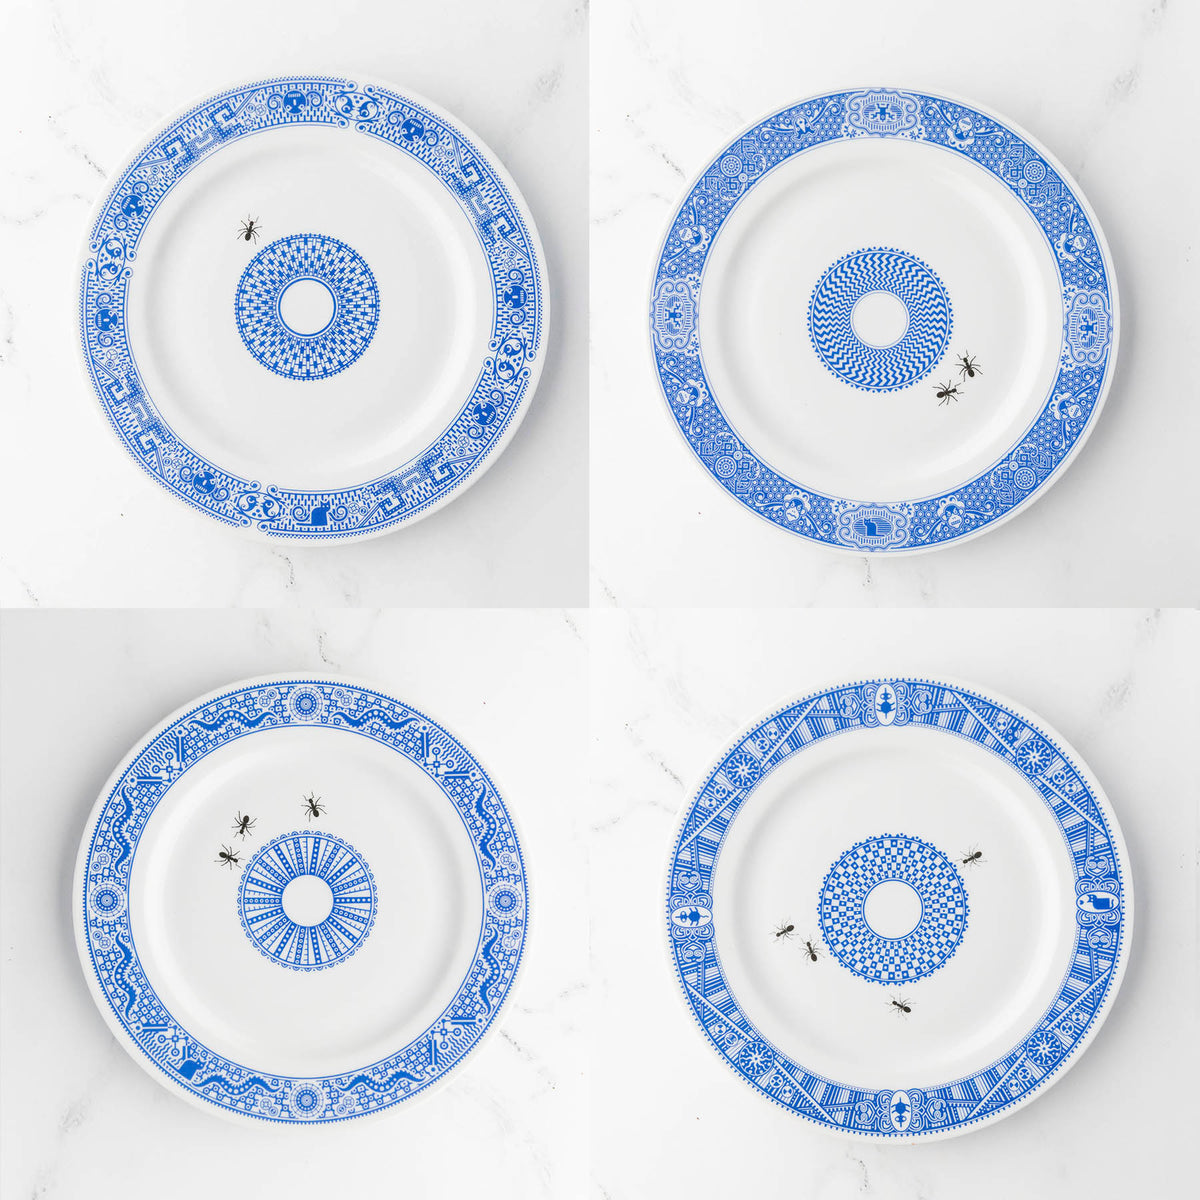 Ants Small Plates (Set of 4)